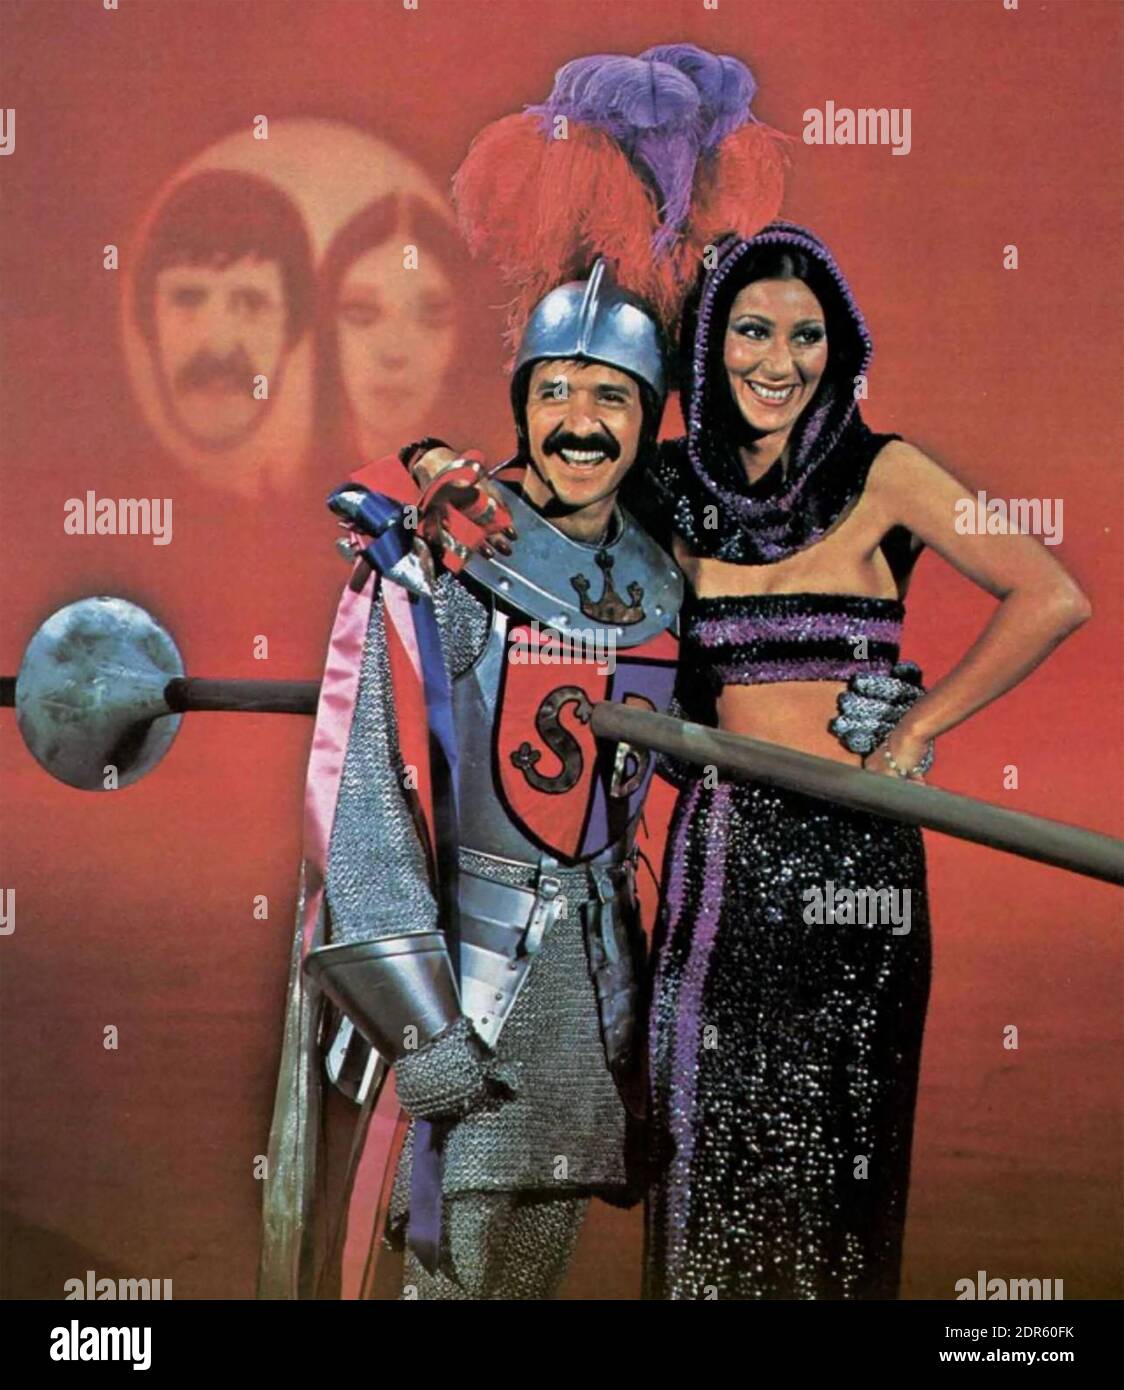 SONNY AND CHER Sonny Bono and Cher about 1976 Stock Photo